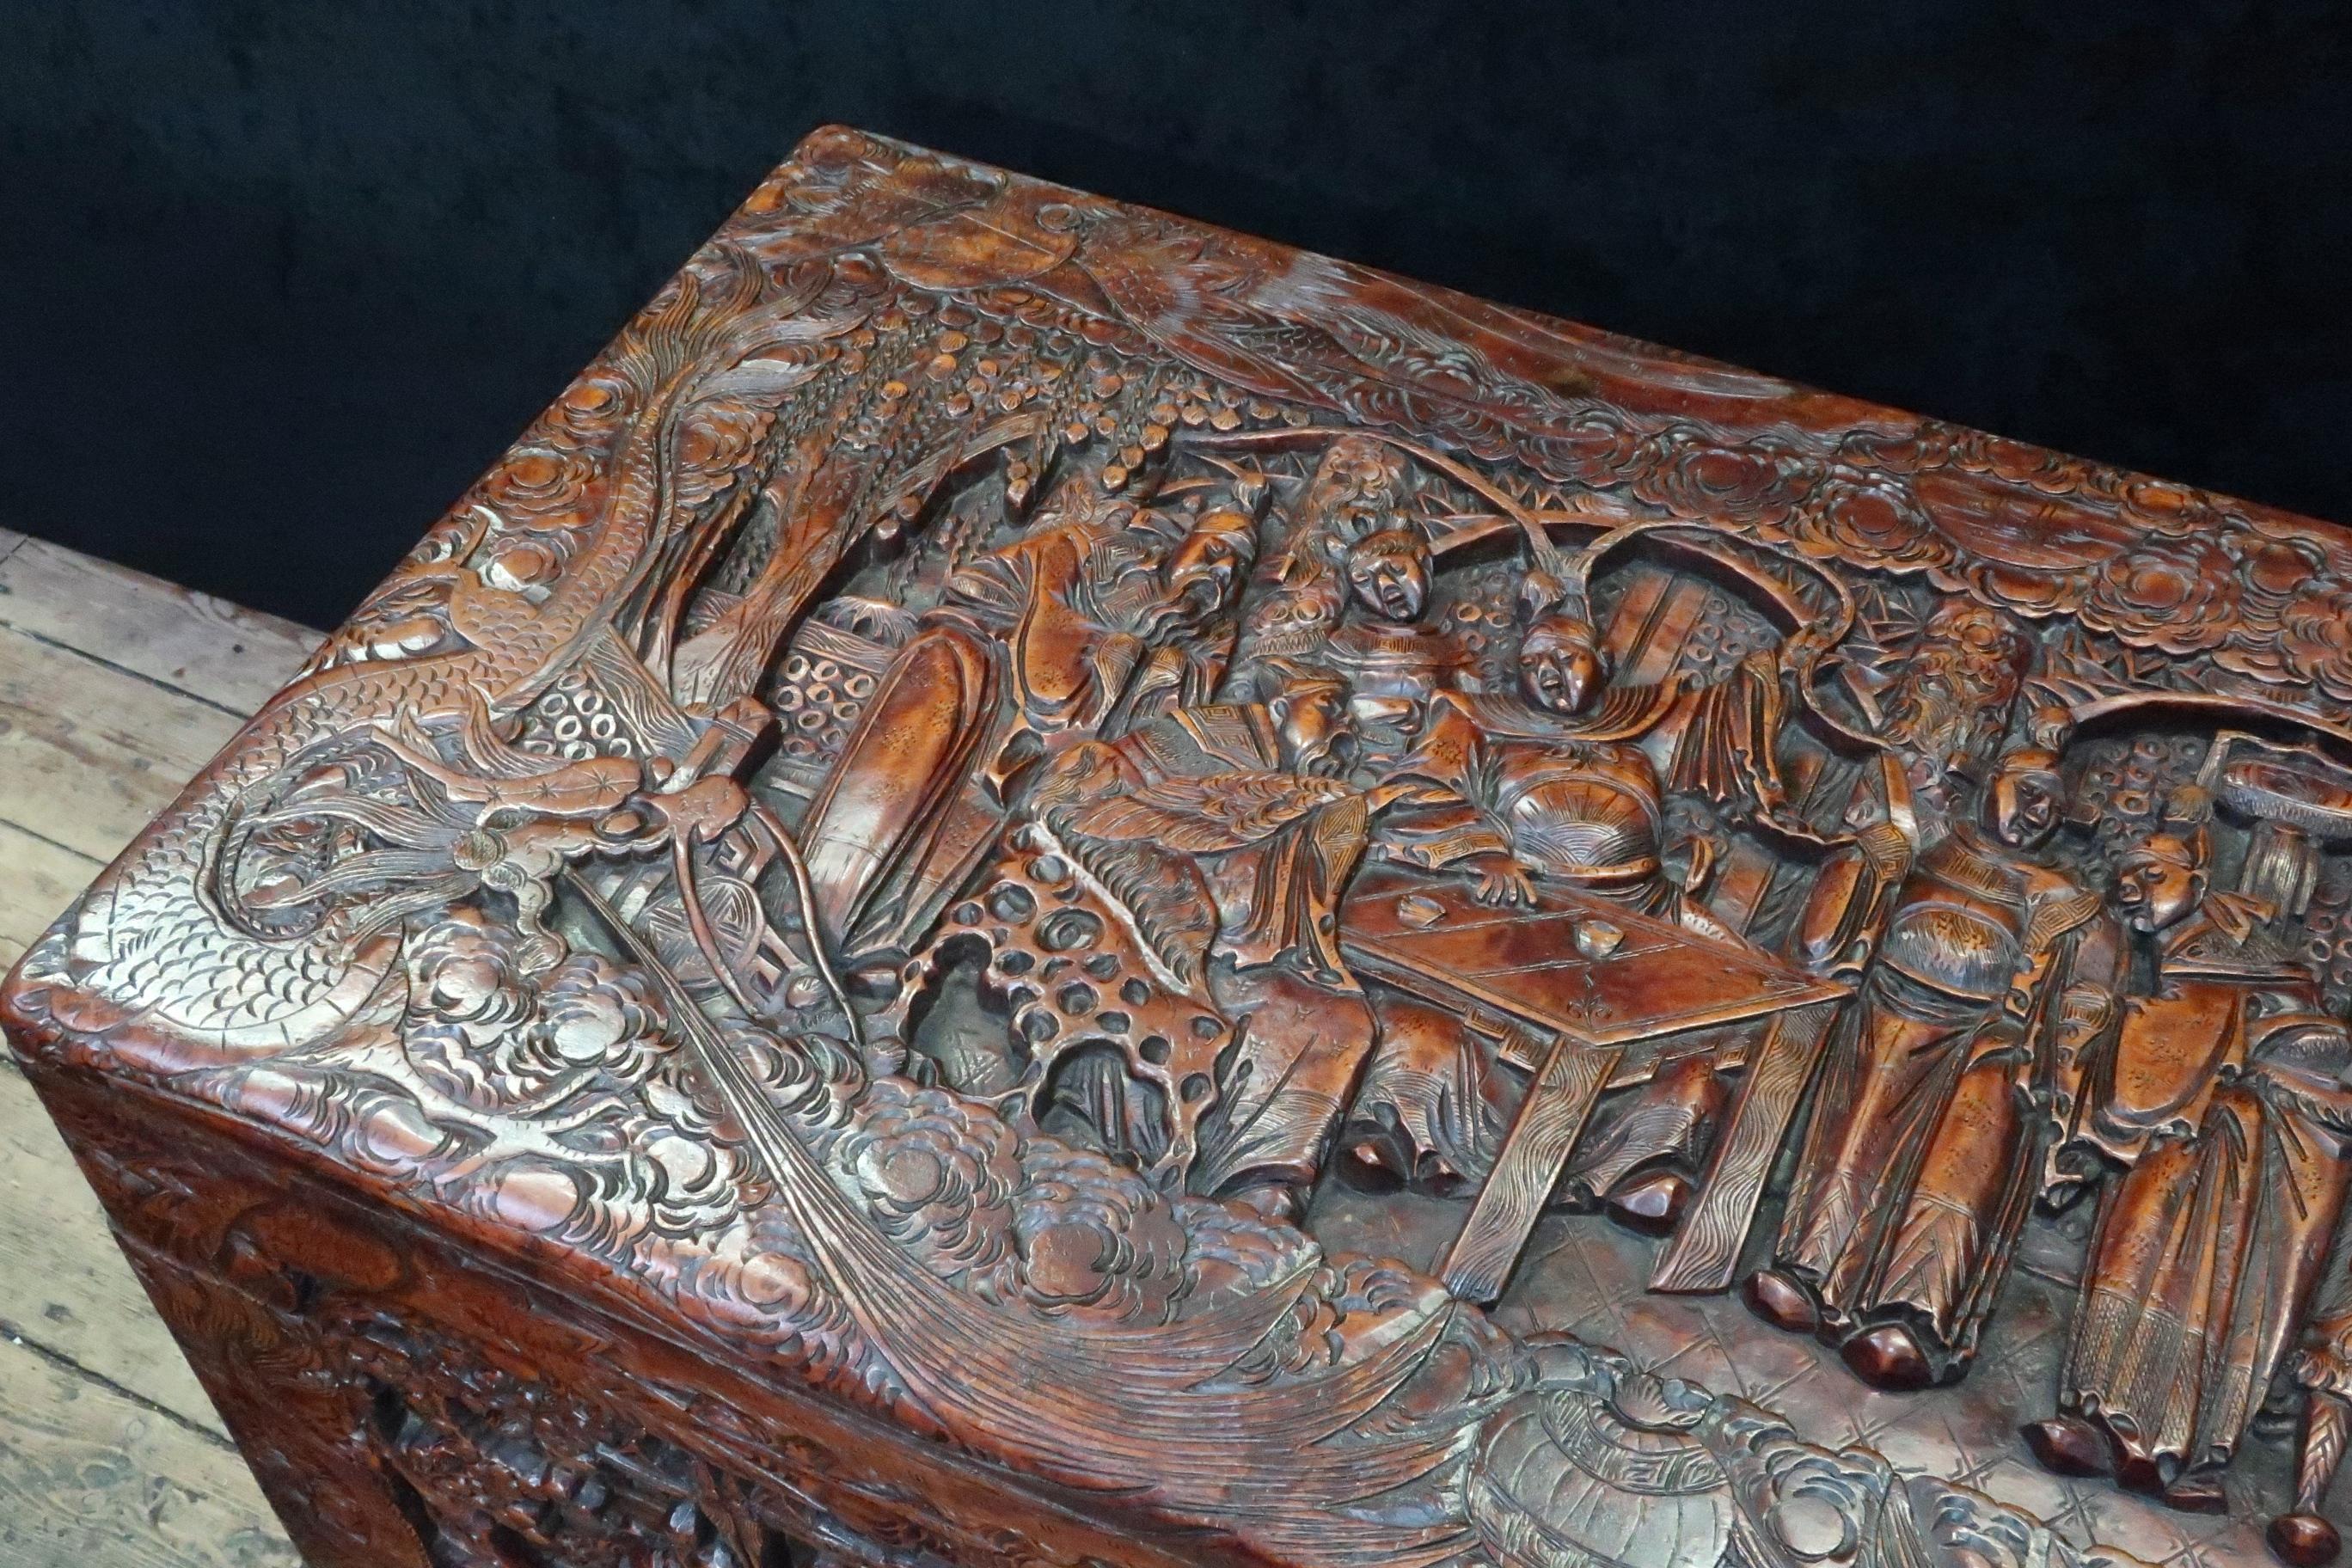 Chinese Export Early 20th Century Oriental Carved Camphor Wood Chest with the Eight Immortals